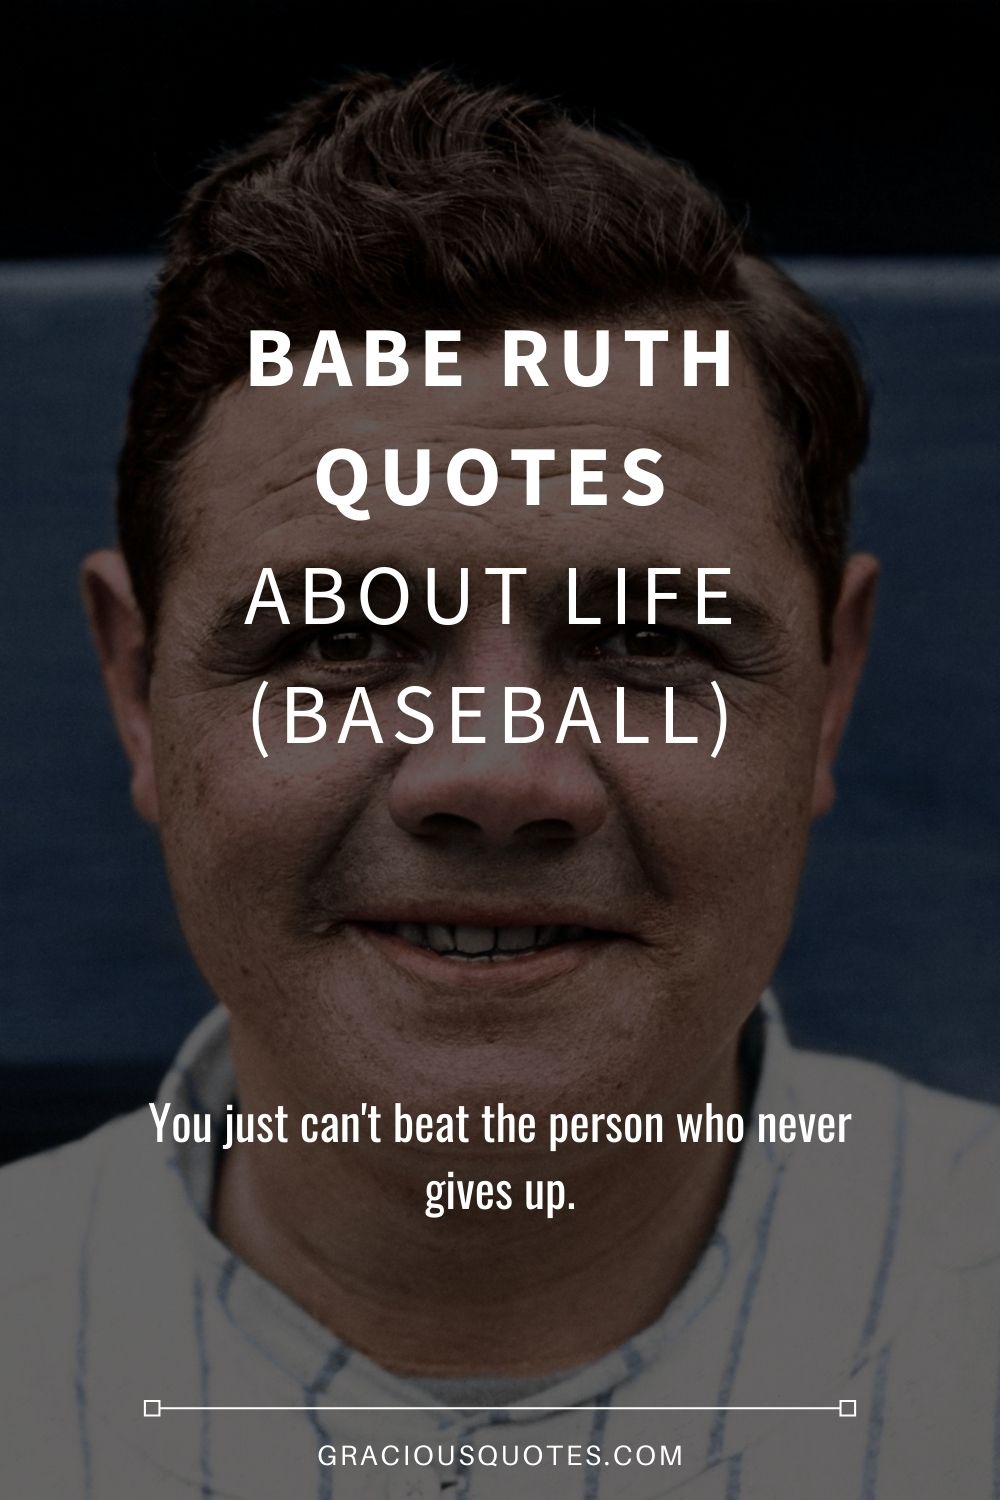 Babe Ruth Quotes About Life (BASEBALL) - Gracious Quotes